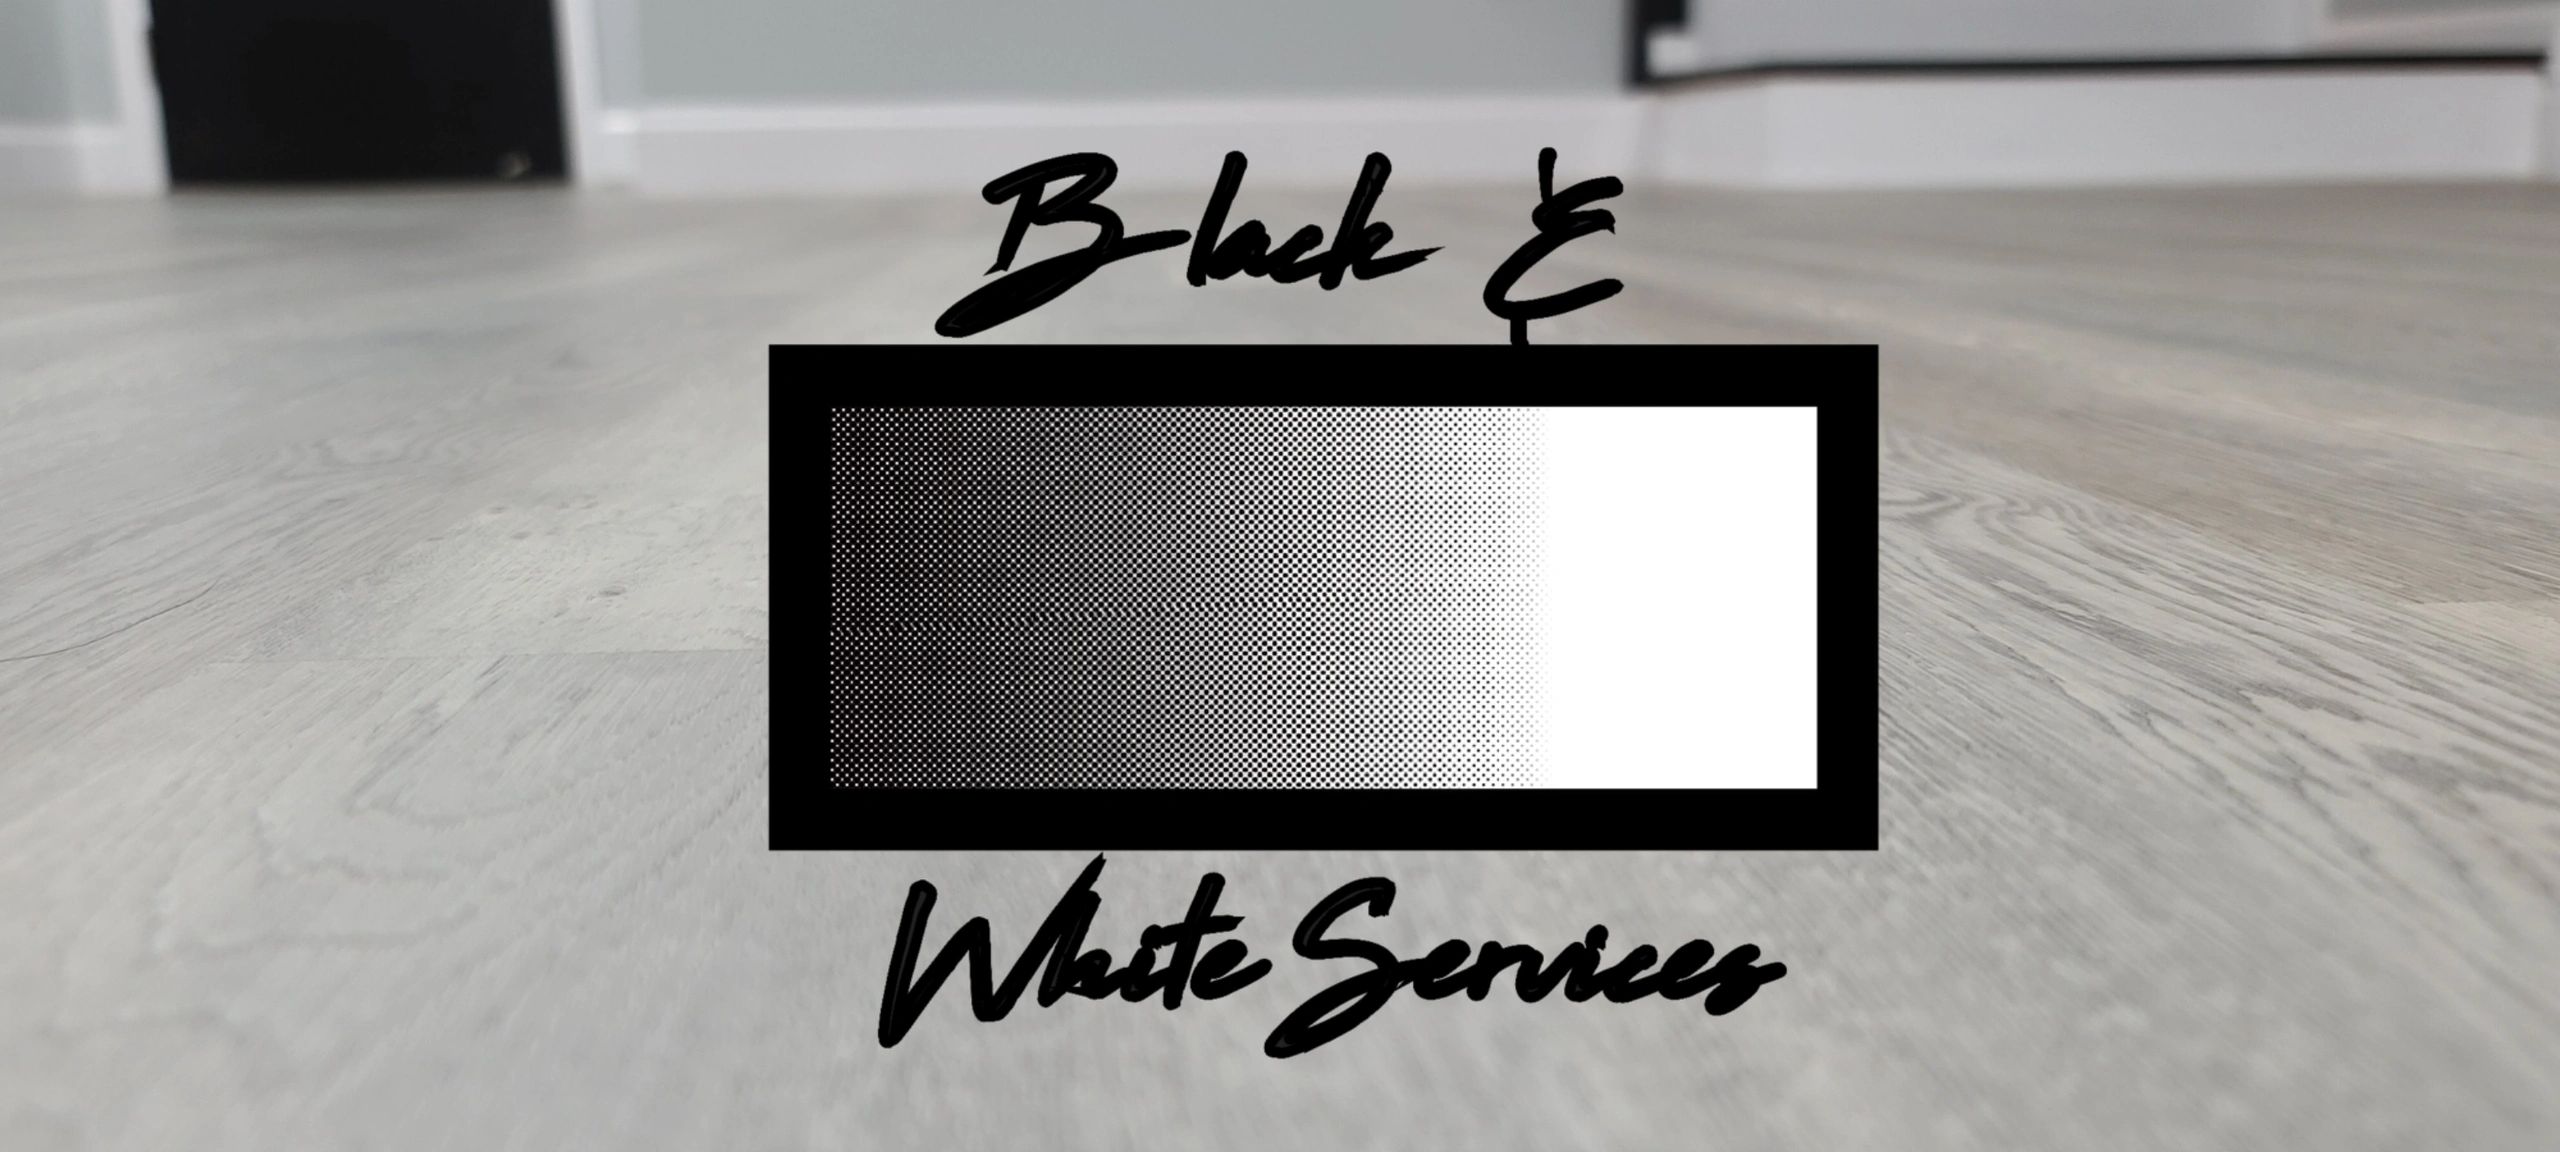 Black & White services LLC, it's  about  colors! mixing black & white makes  a beautiful grey color!